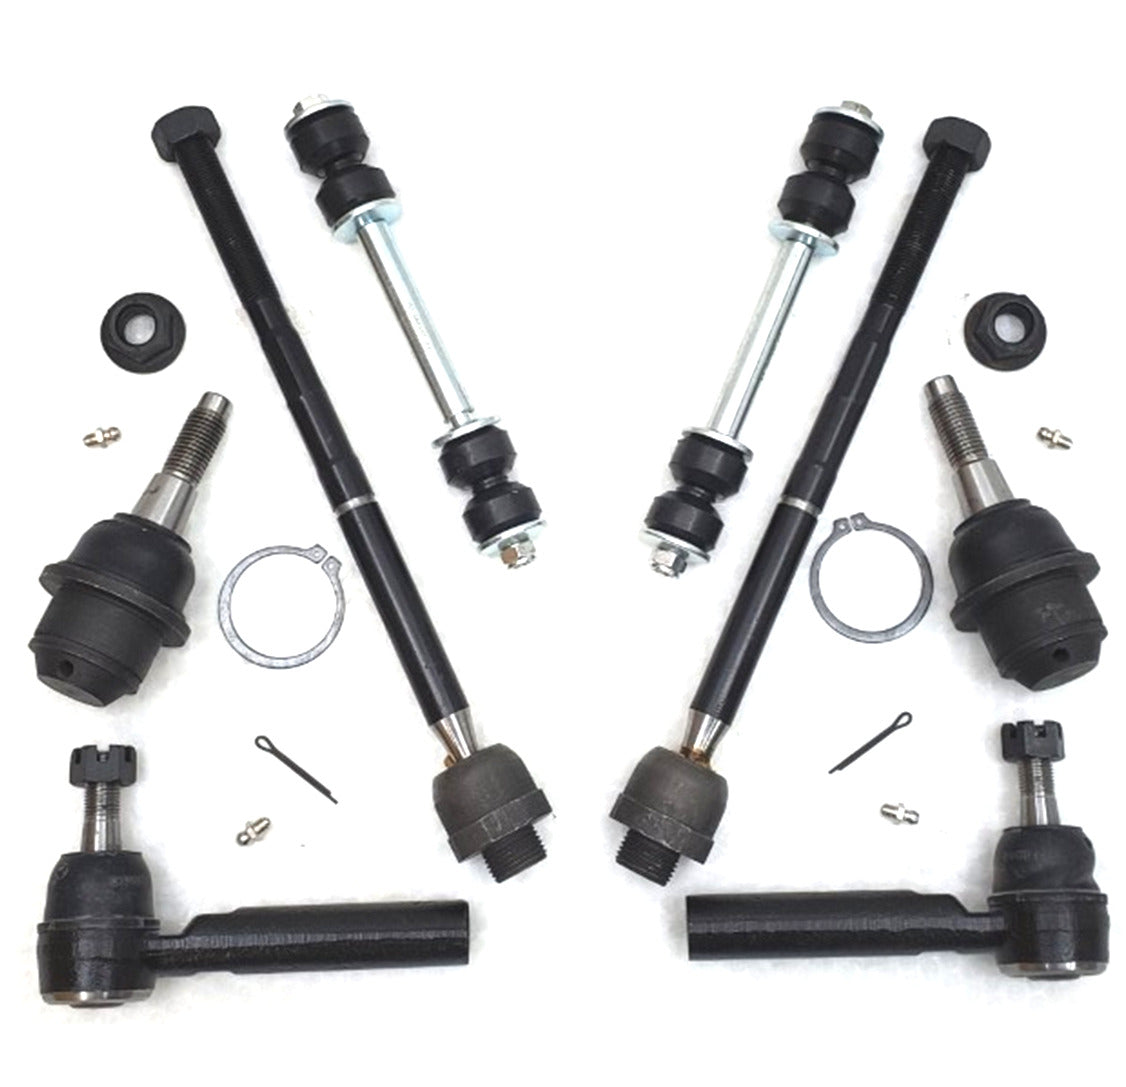 HD Ball Joint & Tie Rod Steering Assembly Kit for 2014-2018 Chevrolet, GMC, Cadillac 2WD, 4x4